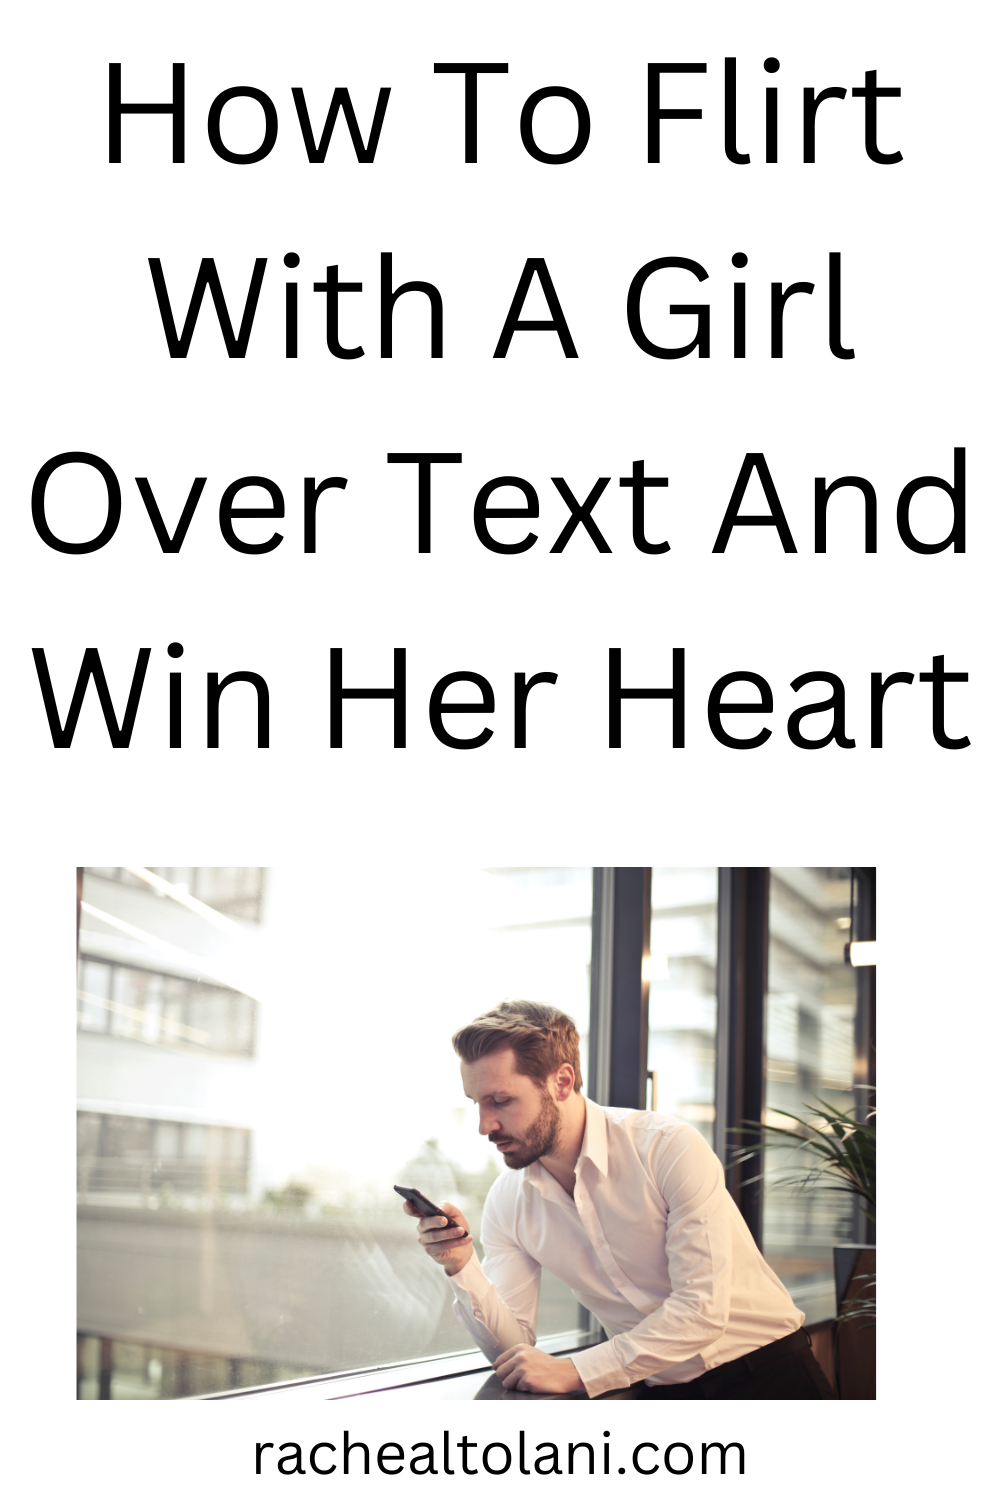 How to flirt with a girl over text